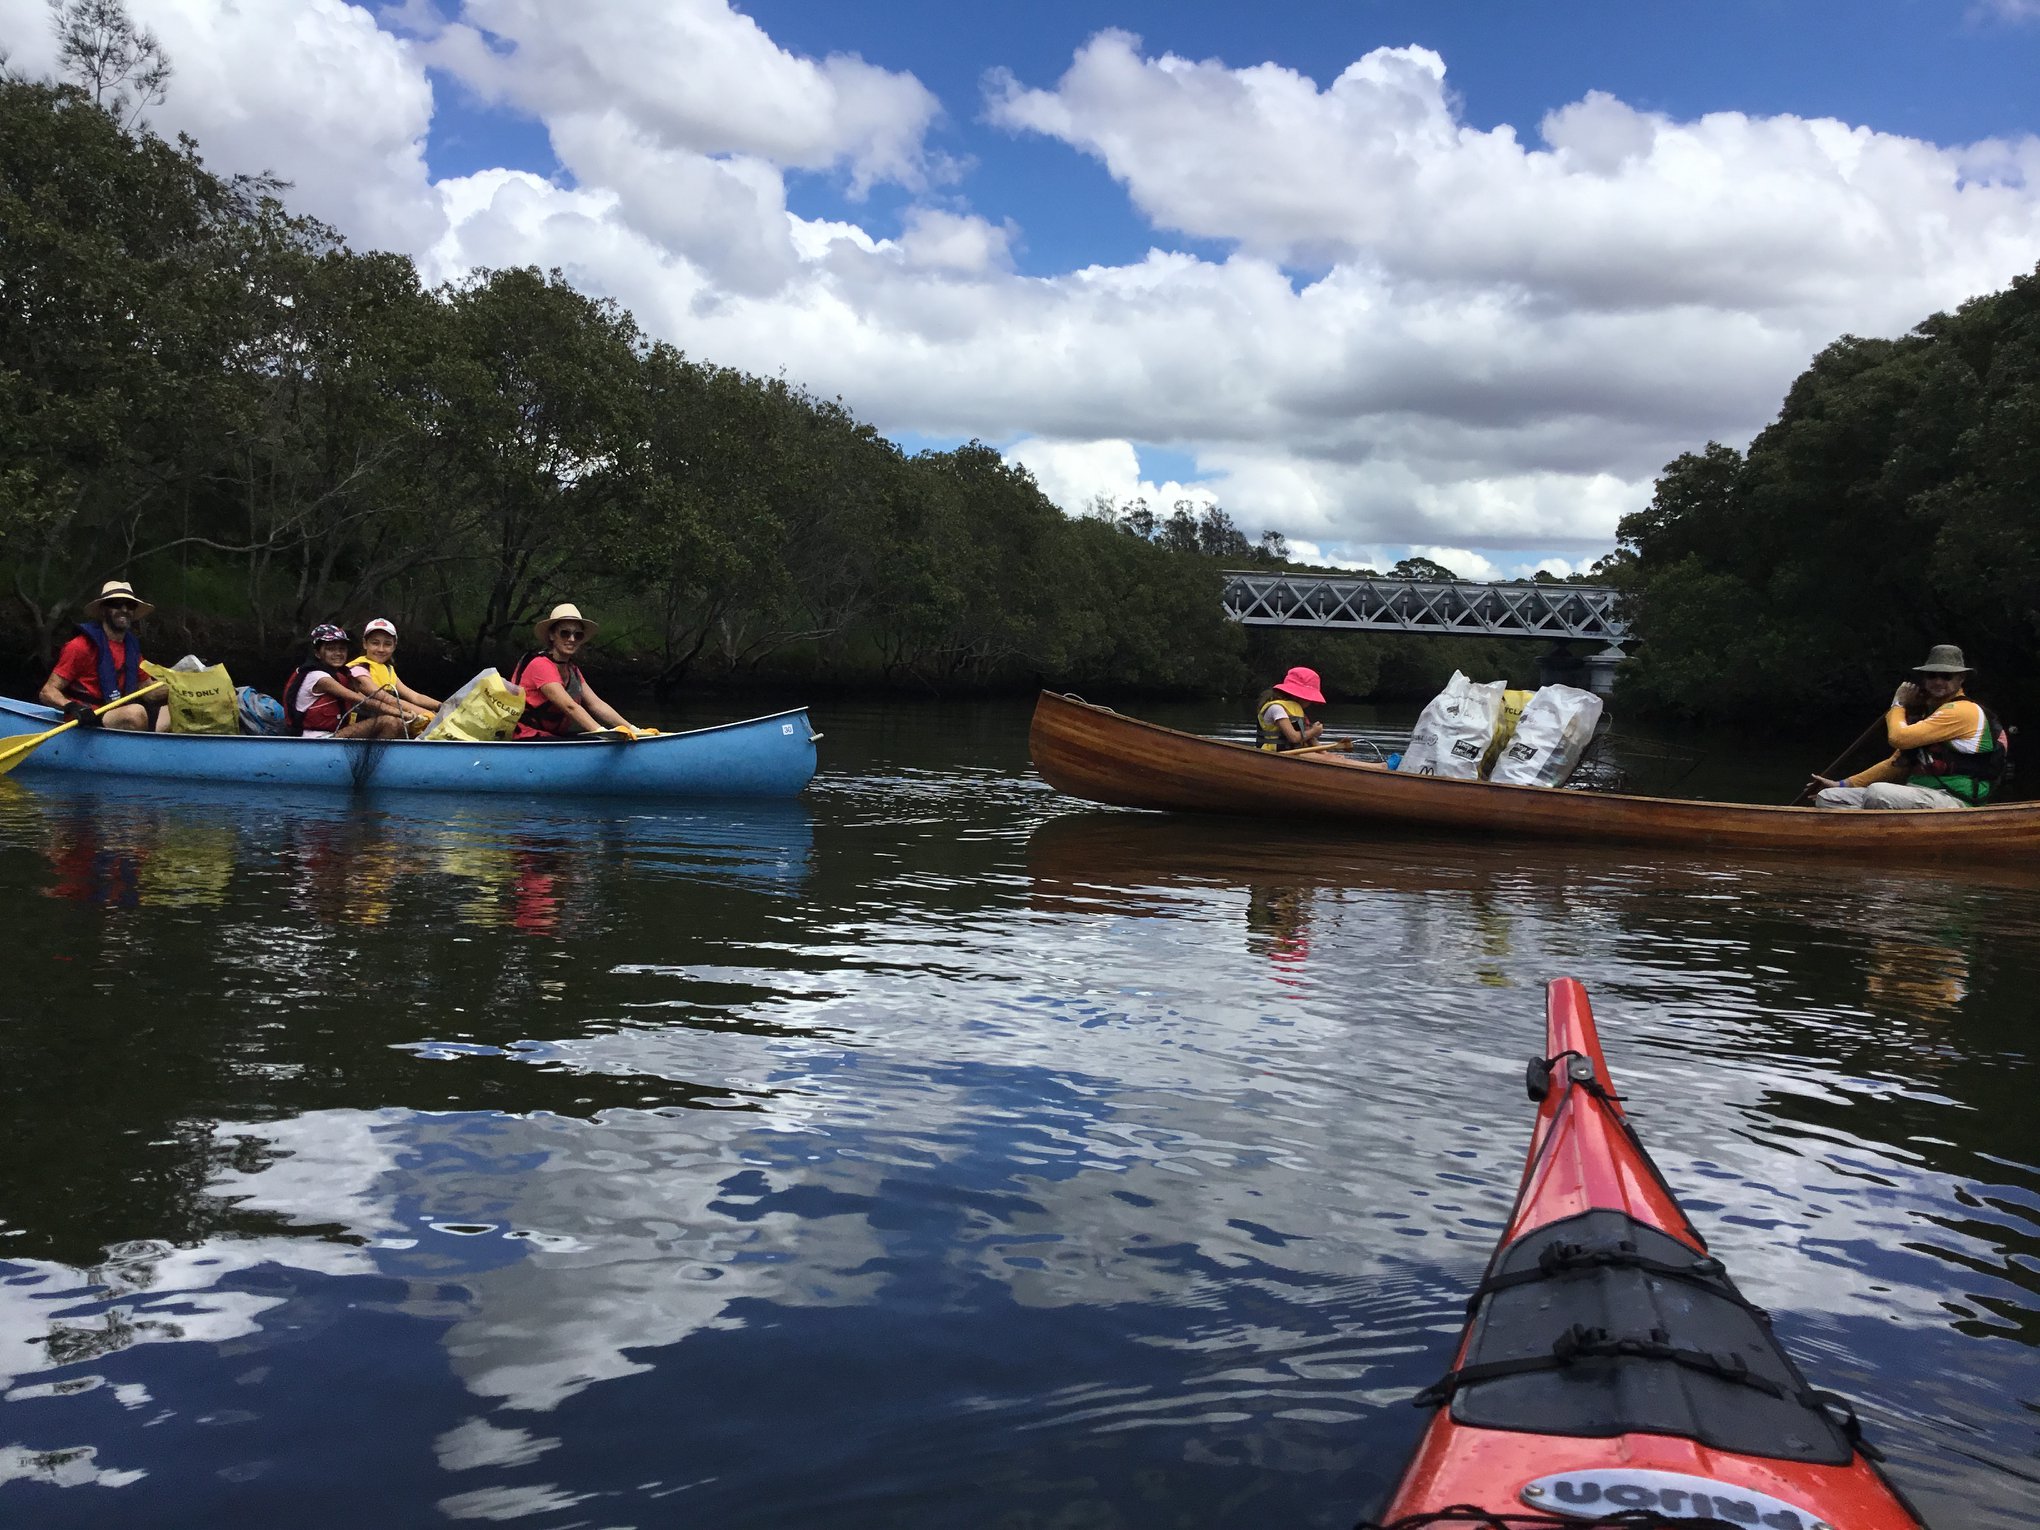 174_9282_16May2019155518_Cooks River Alliance Clean Up picture.jpg